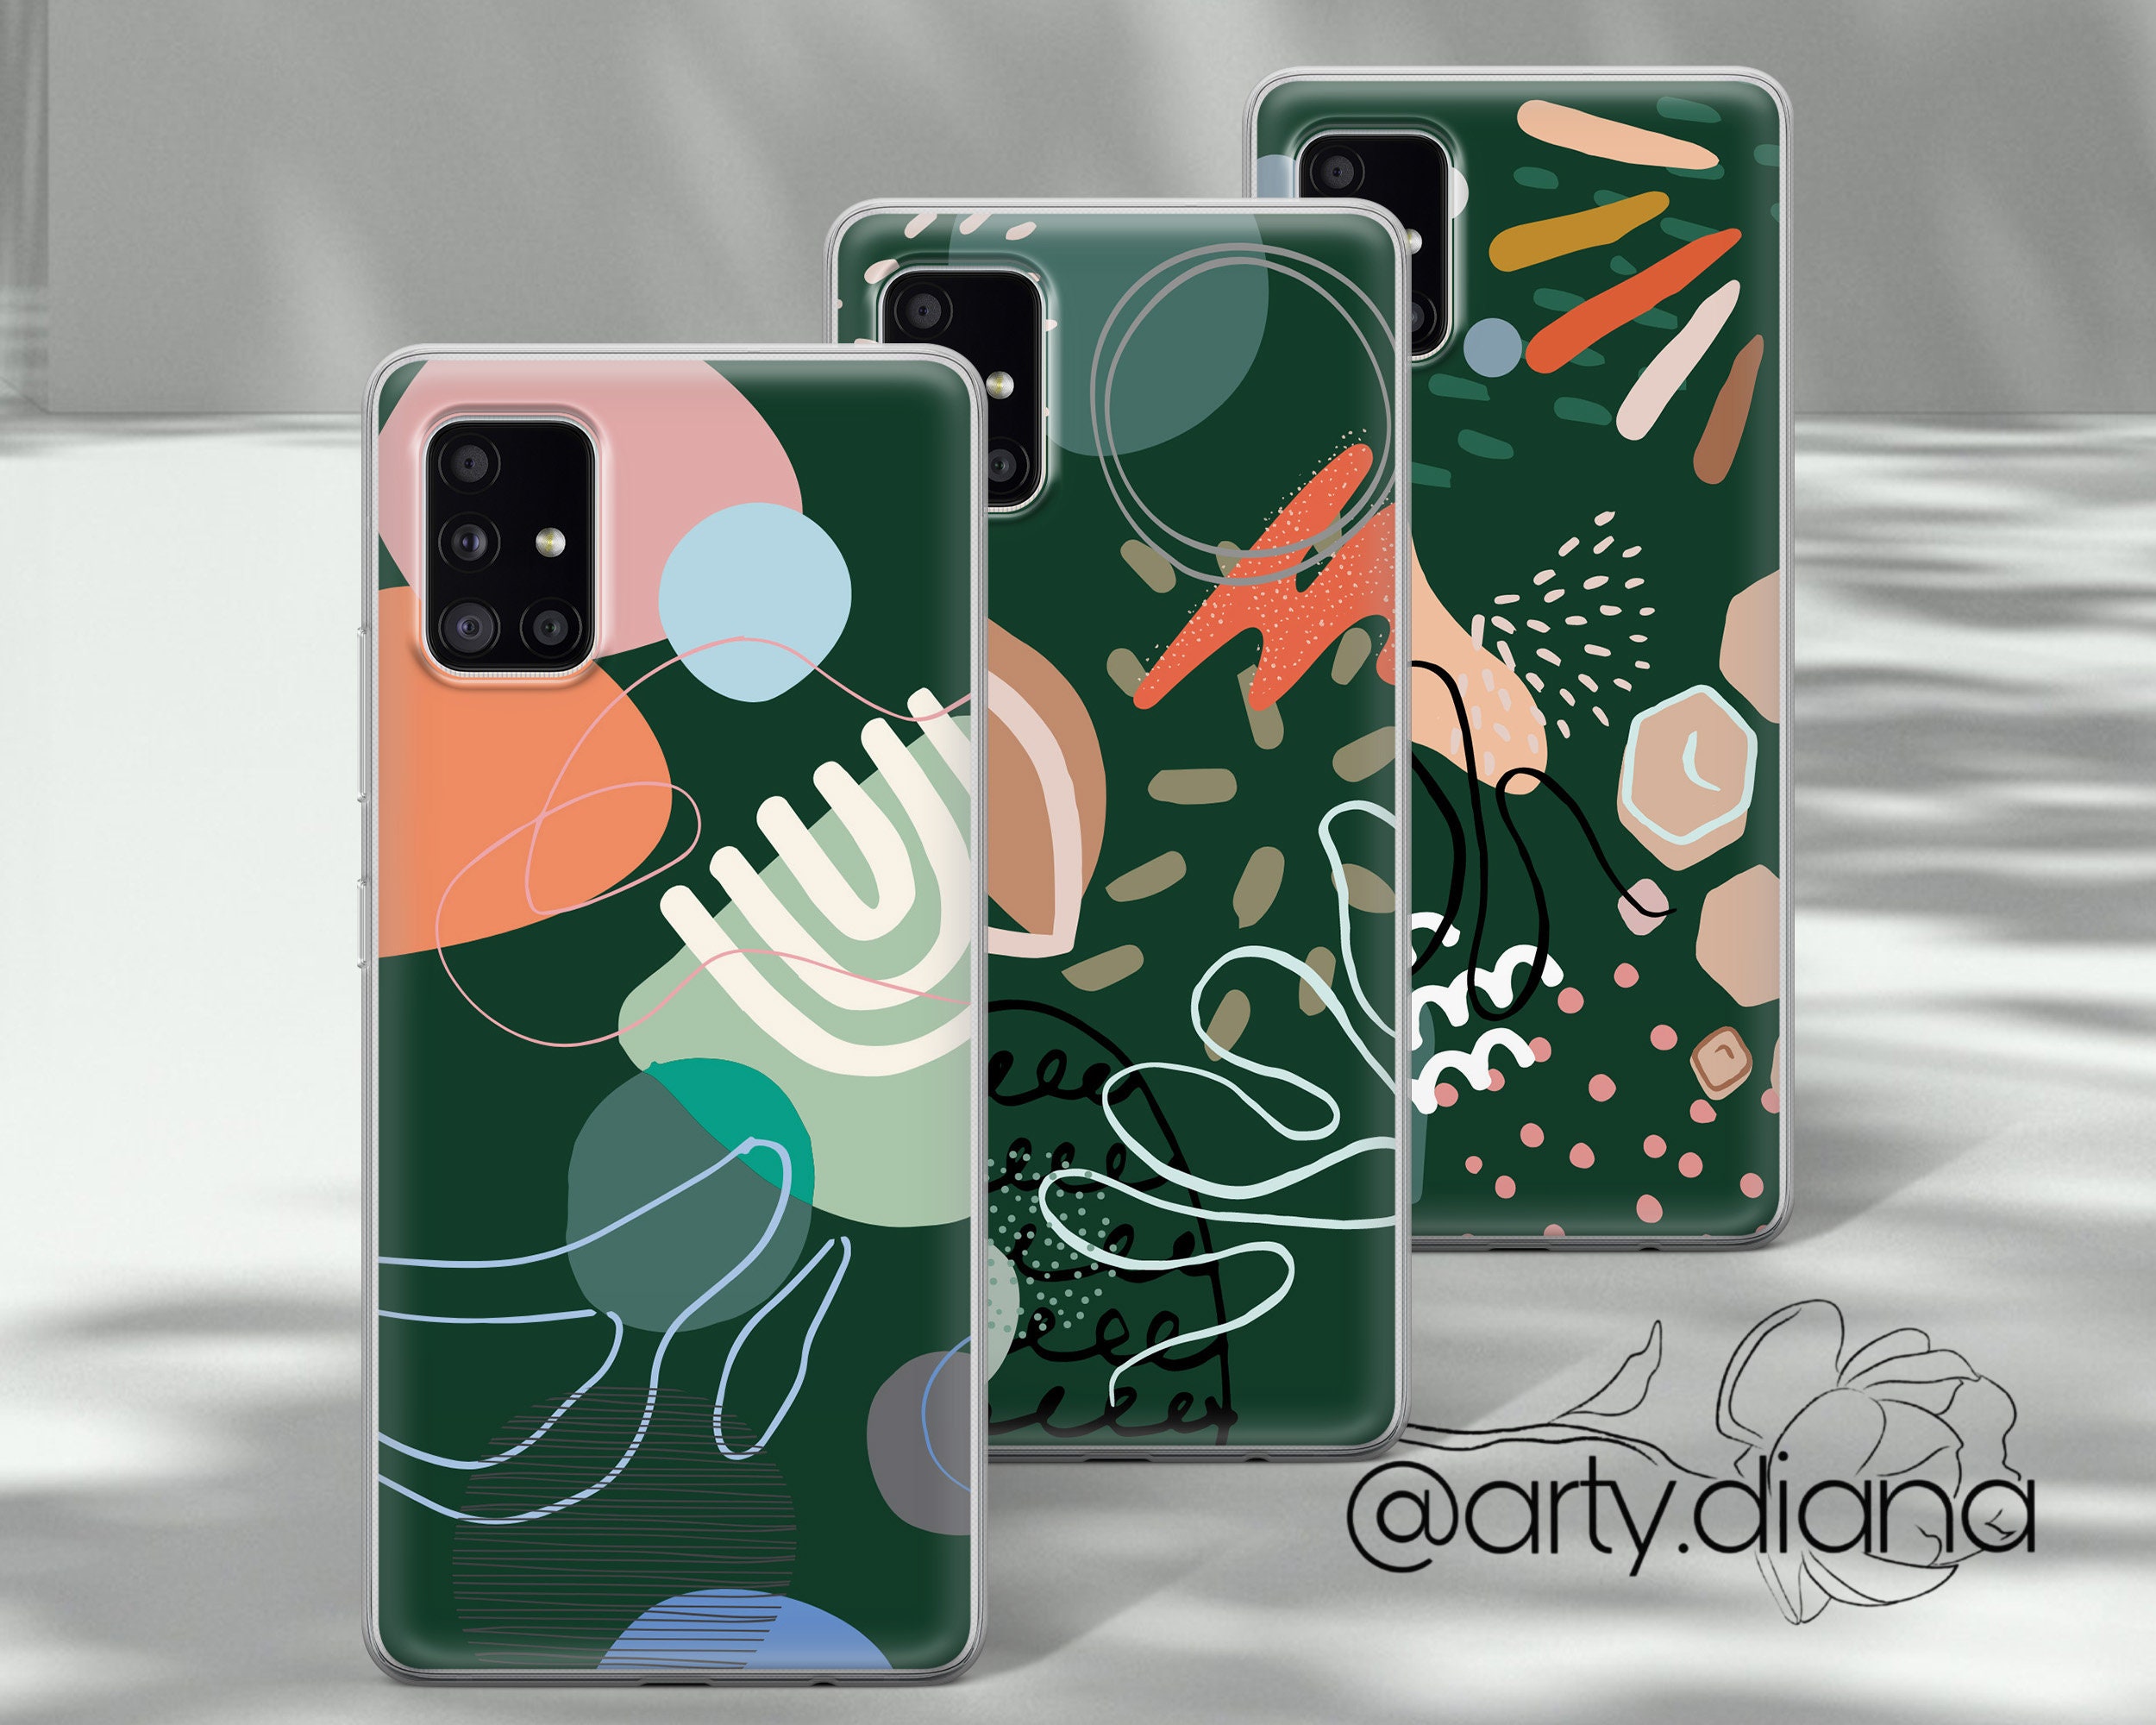 Samsung Phone Case with modern abstract design